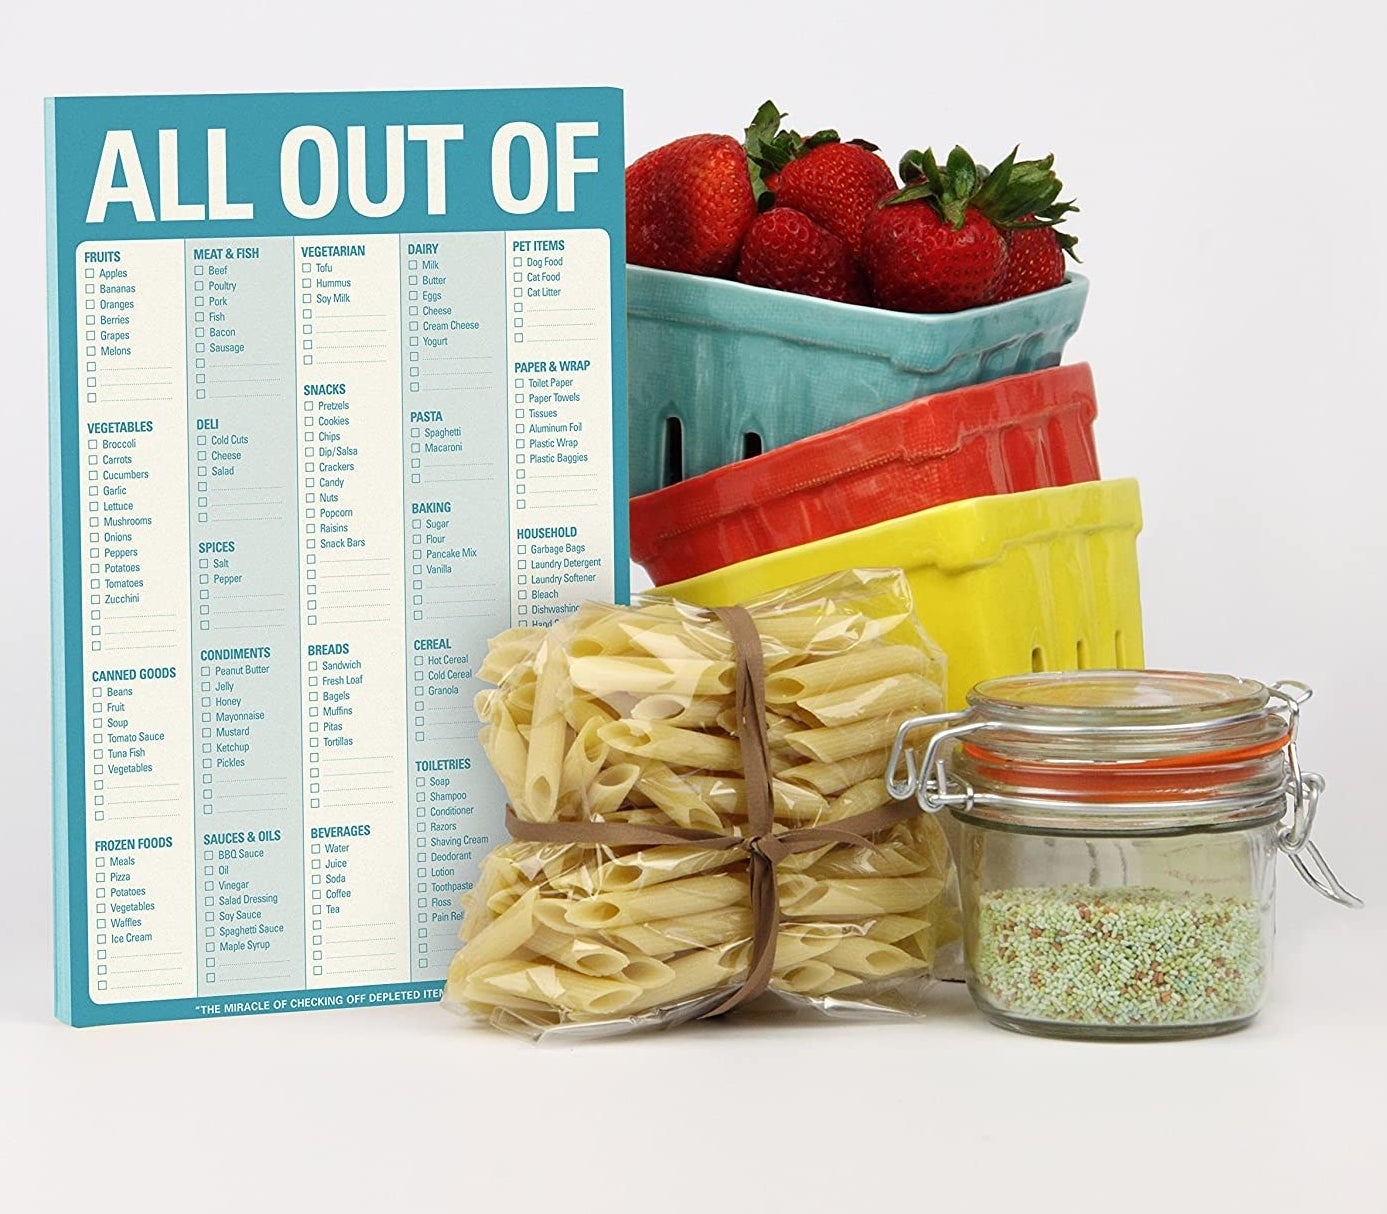 the blue pad with categories like vegetables, canned goods, frozen foods, and toiletries